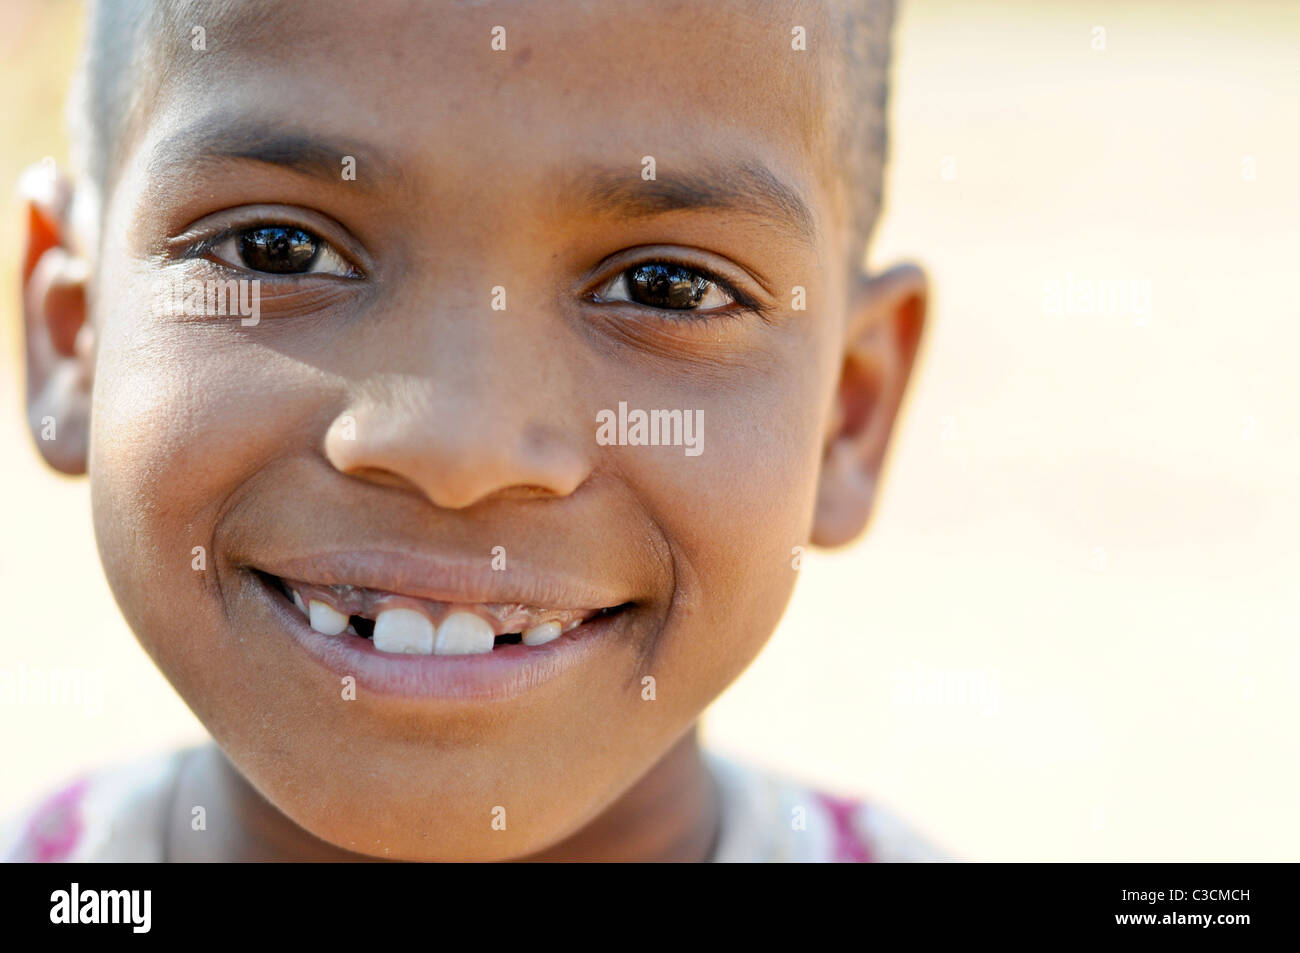 This young Indian girl has some missing teeth, but big beautiful eyes and smile. Stock Photo